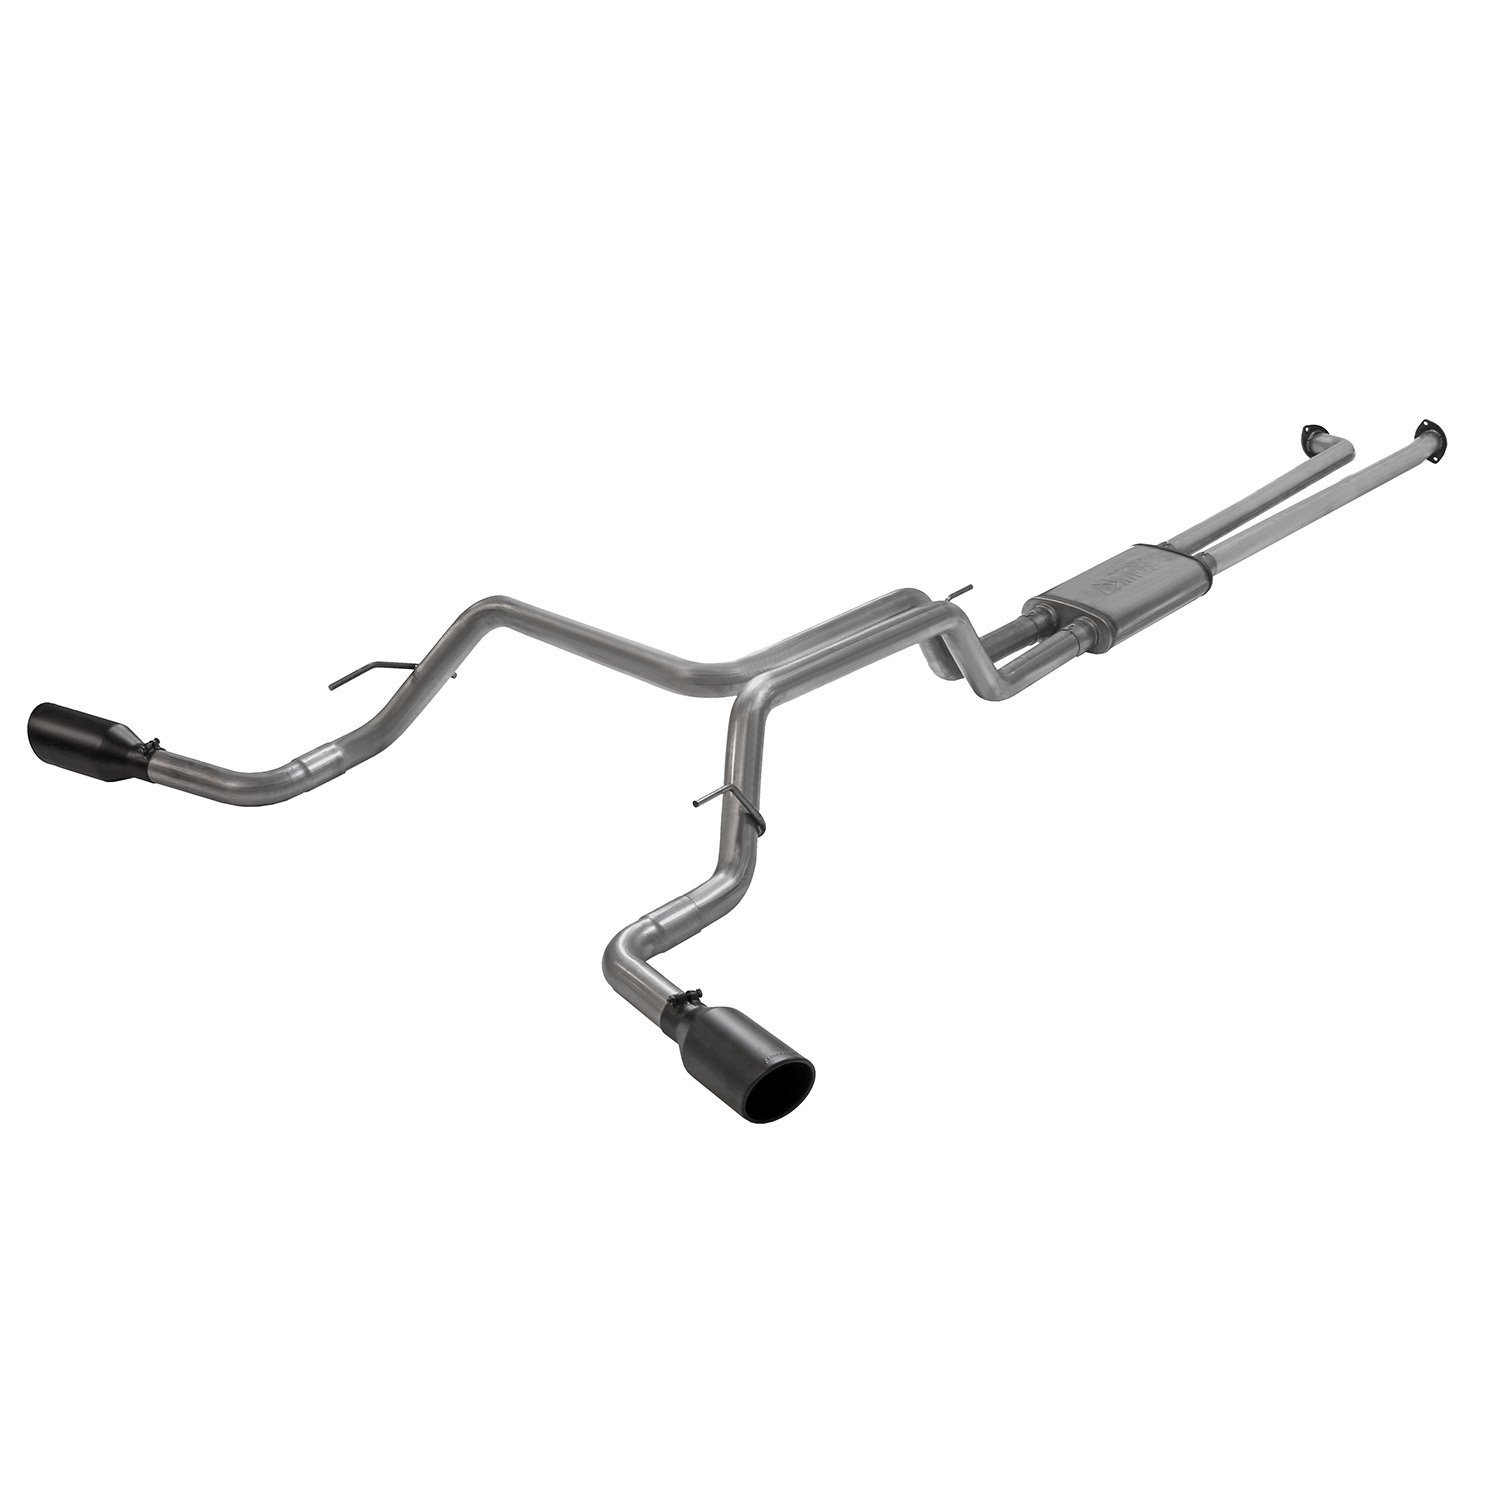 FlowFX Cat-Back Exhaust System for 2007-2009 Toyota Tundra